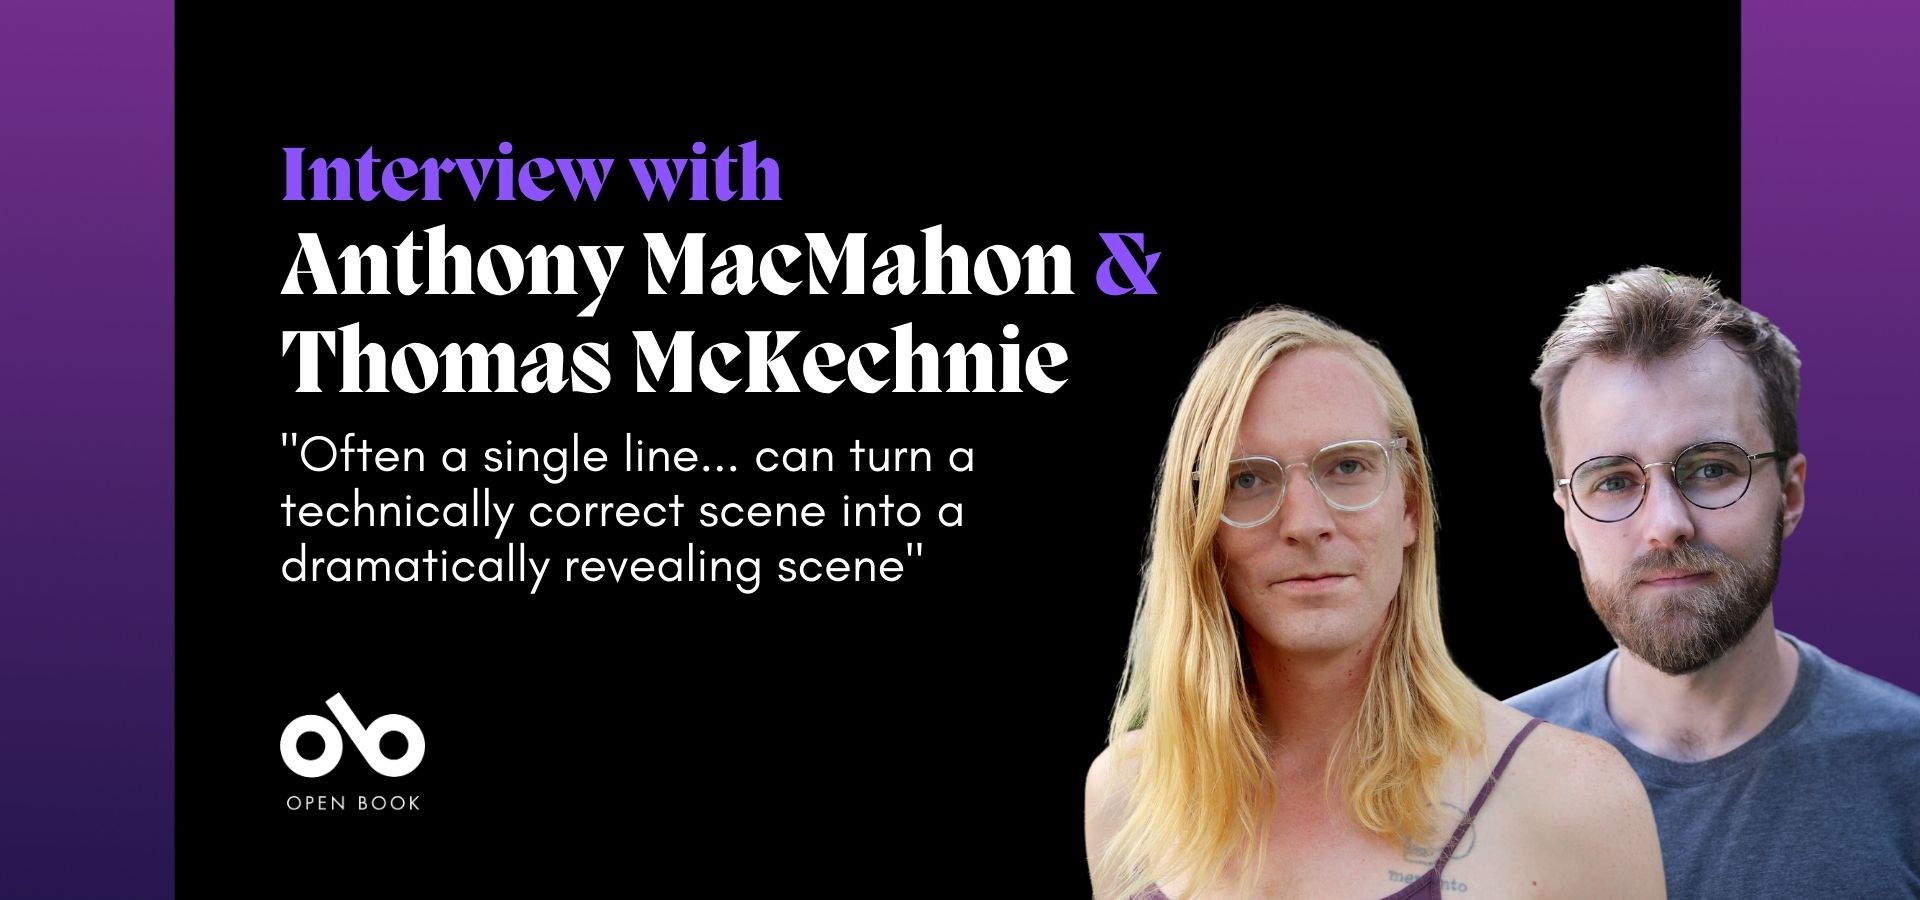 Purple and black banner image with photos of playwrights Anthony MacMahon &  Thomas McKechnie and text reading "interview with Anthony MacMahon &  Thomas McKechnie" and ""Often a single line... can turn a technically correct scene into a dramatically revealing scene"